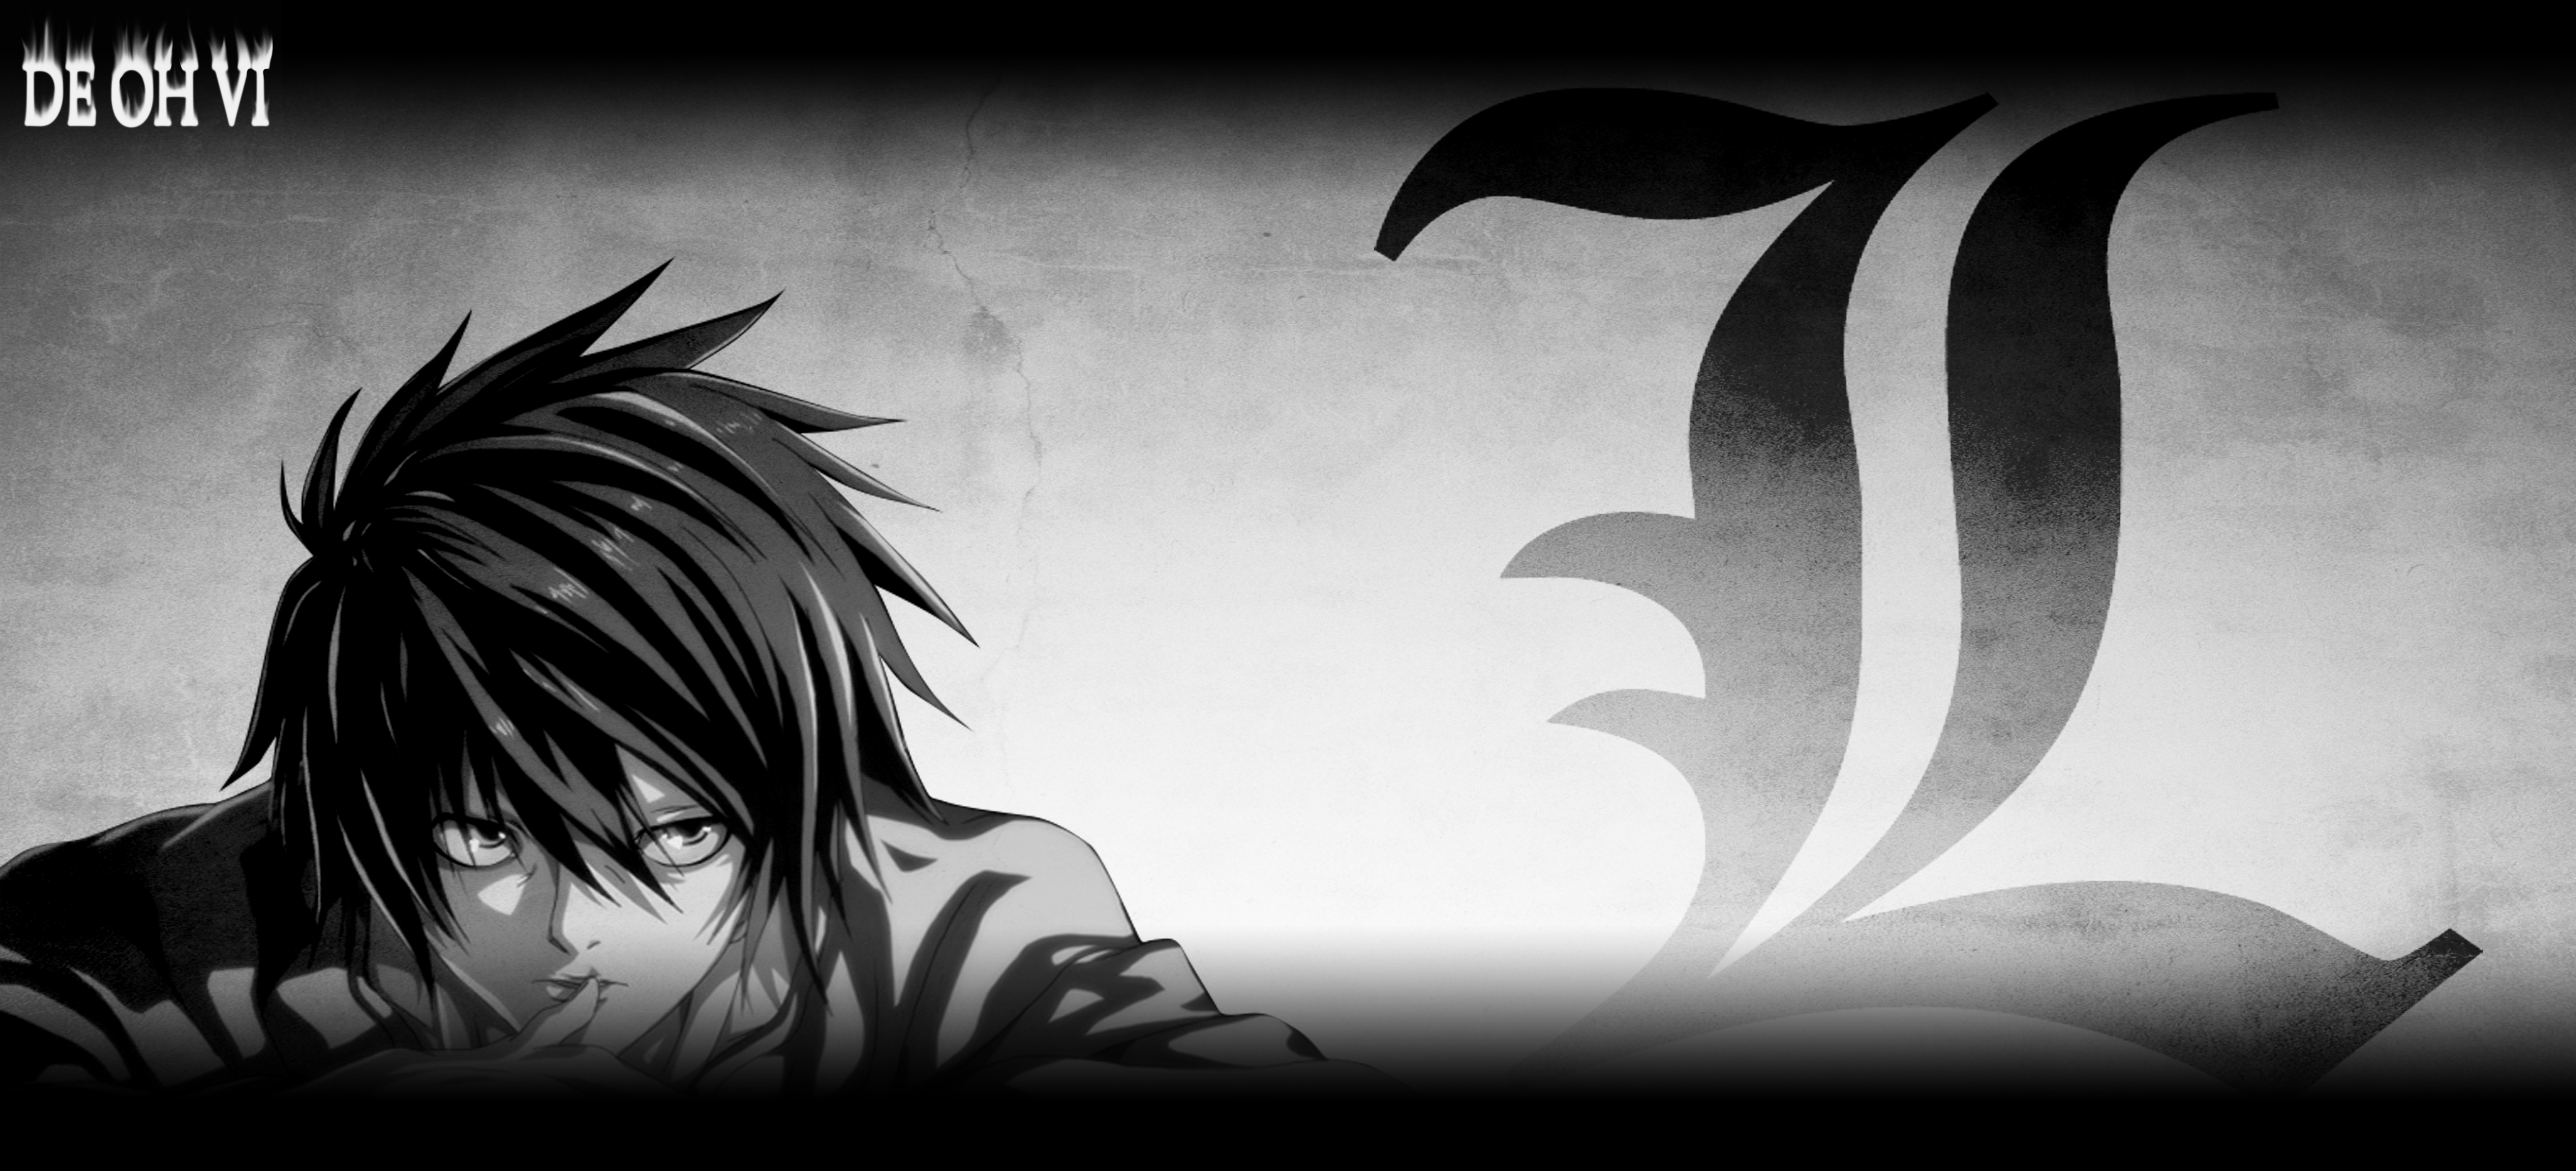 Wallpaper ID 337226  Anime Death Note Phone Wallpaper L Death Note  1284x2778 free download